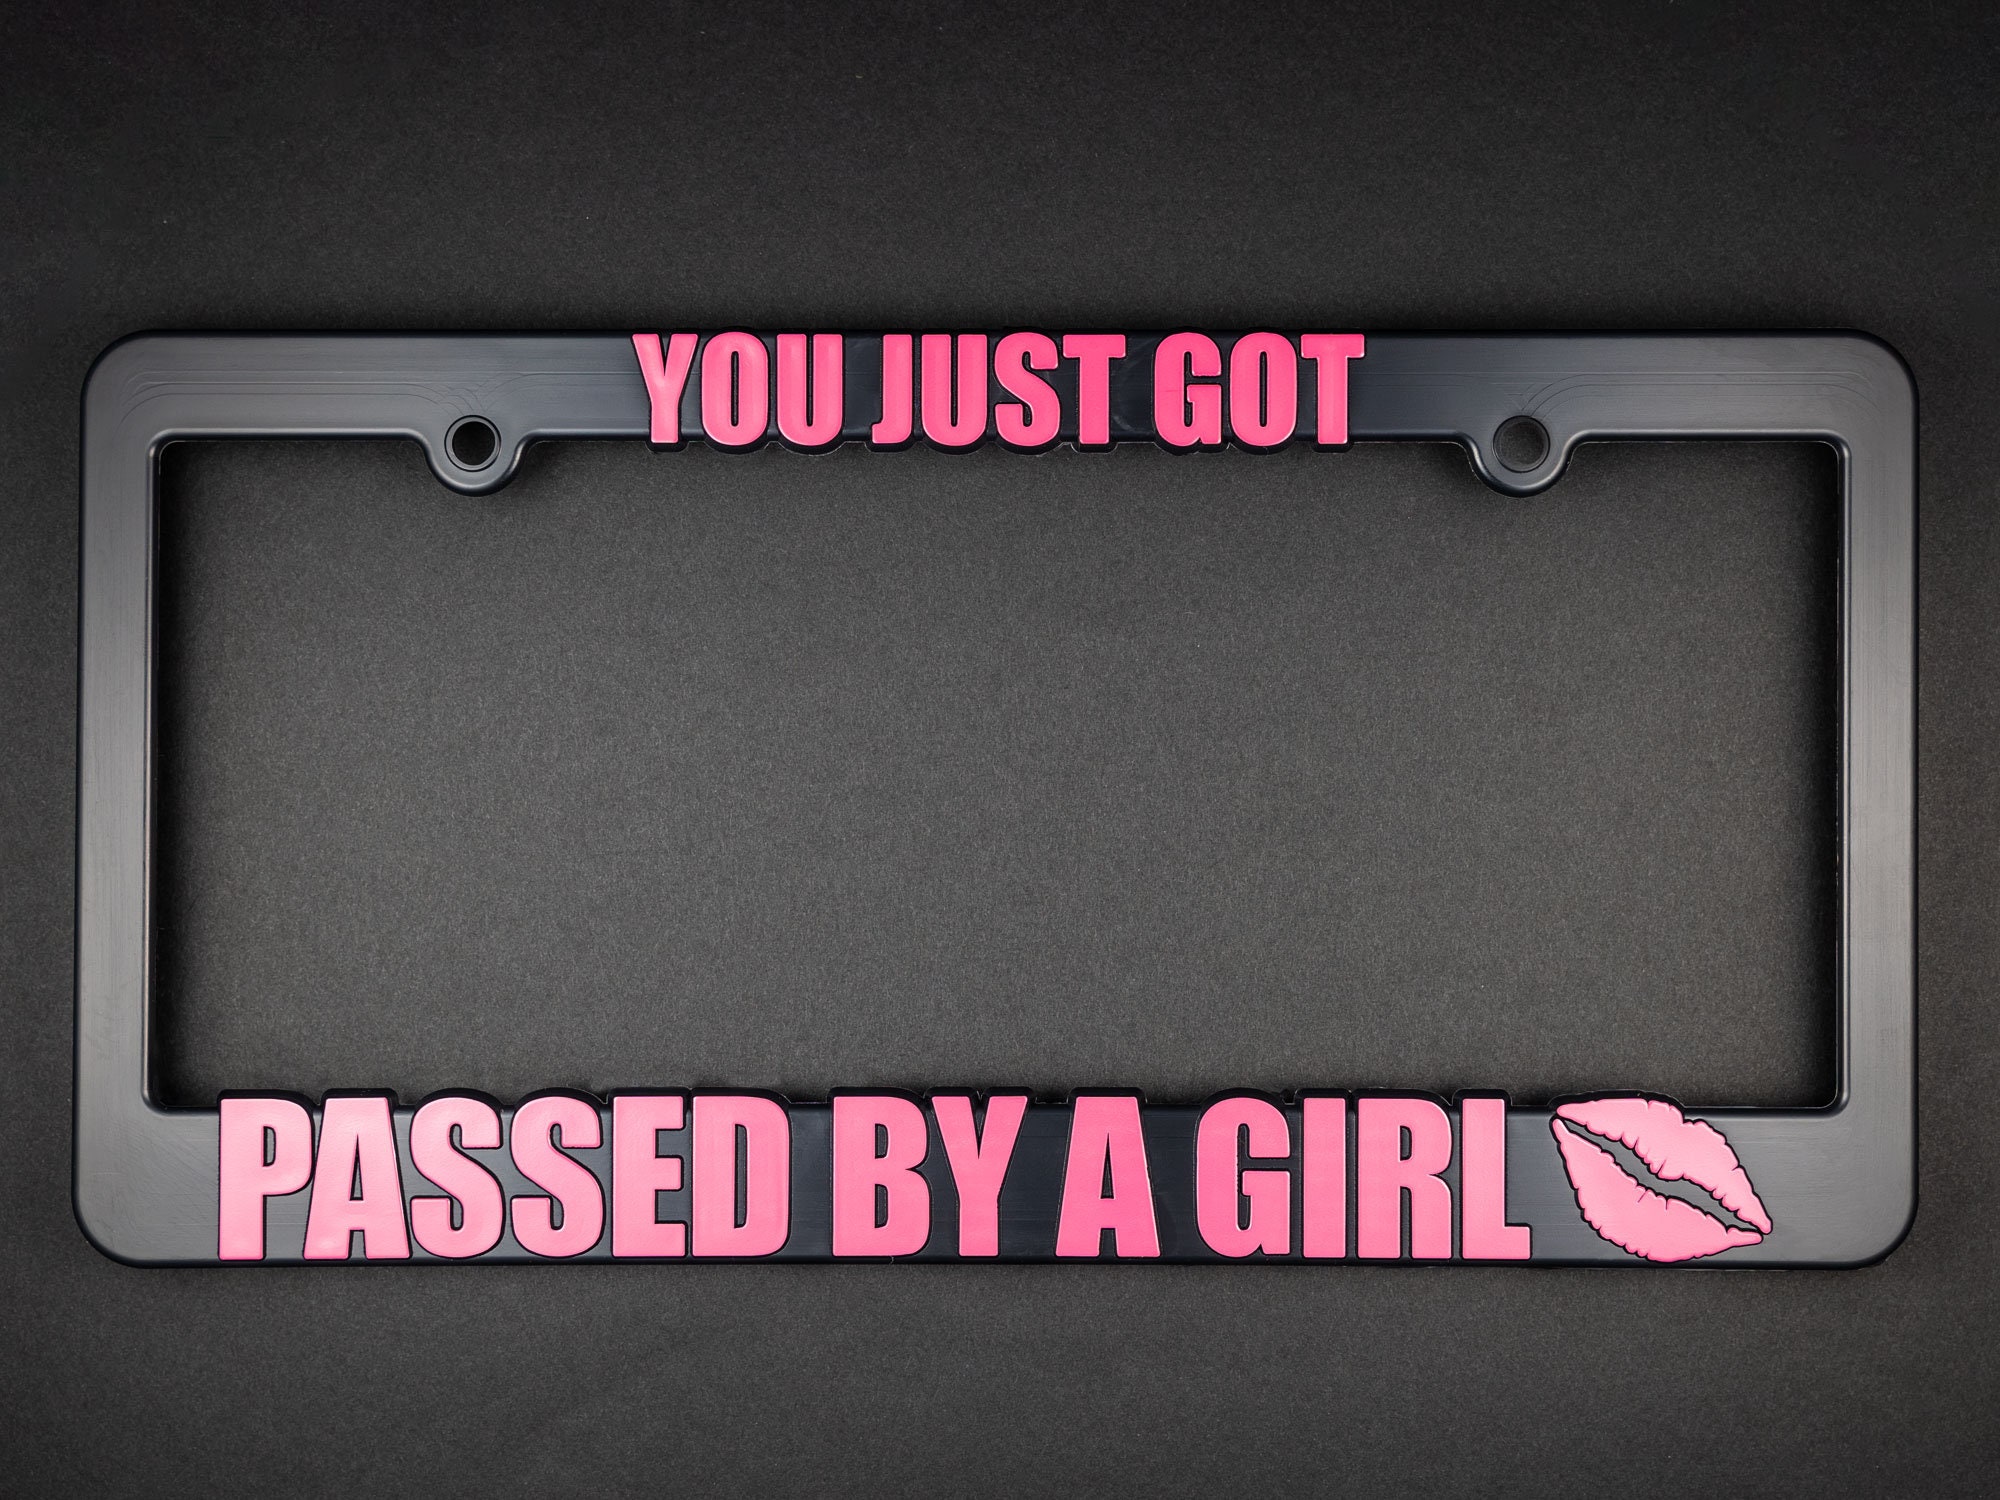 Metal License Plate Frame You Just Got Passed by A Girl Car Accessories  Chrome